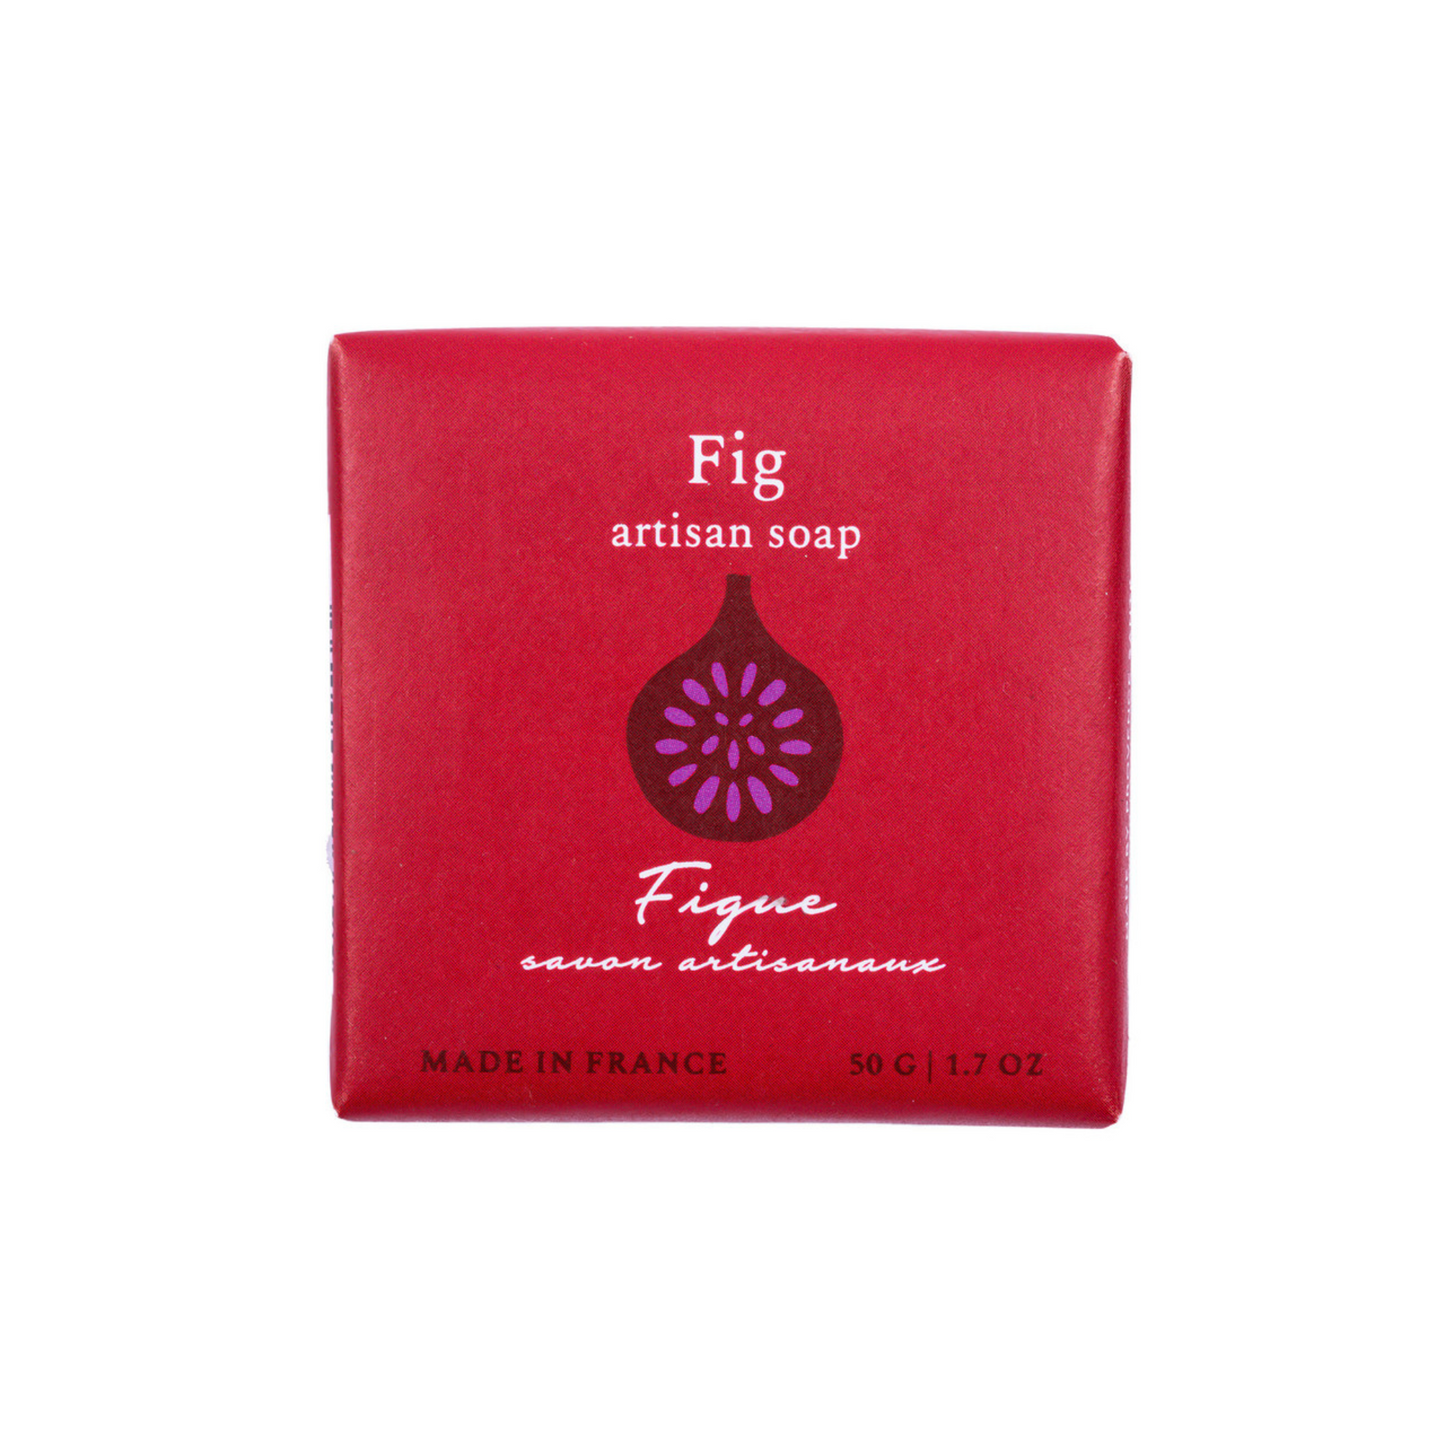 Primary Image of Provence Sante Fig Guest Soap (1.7 oz)